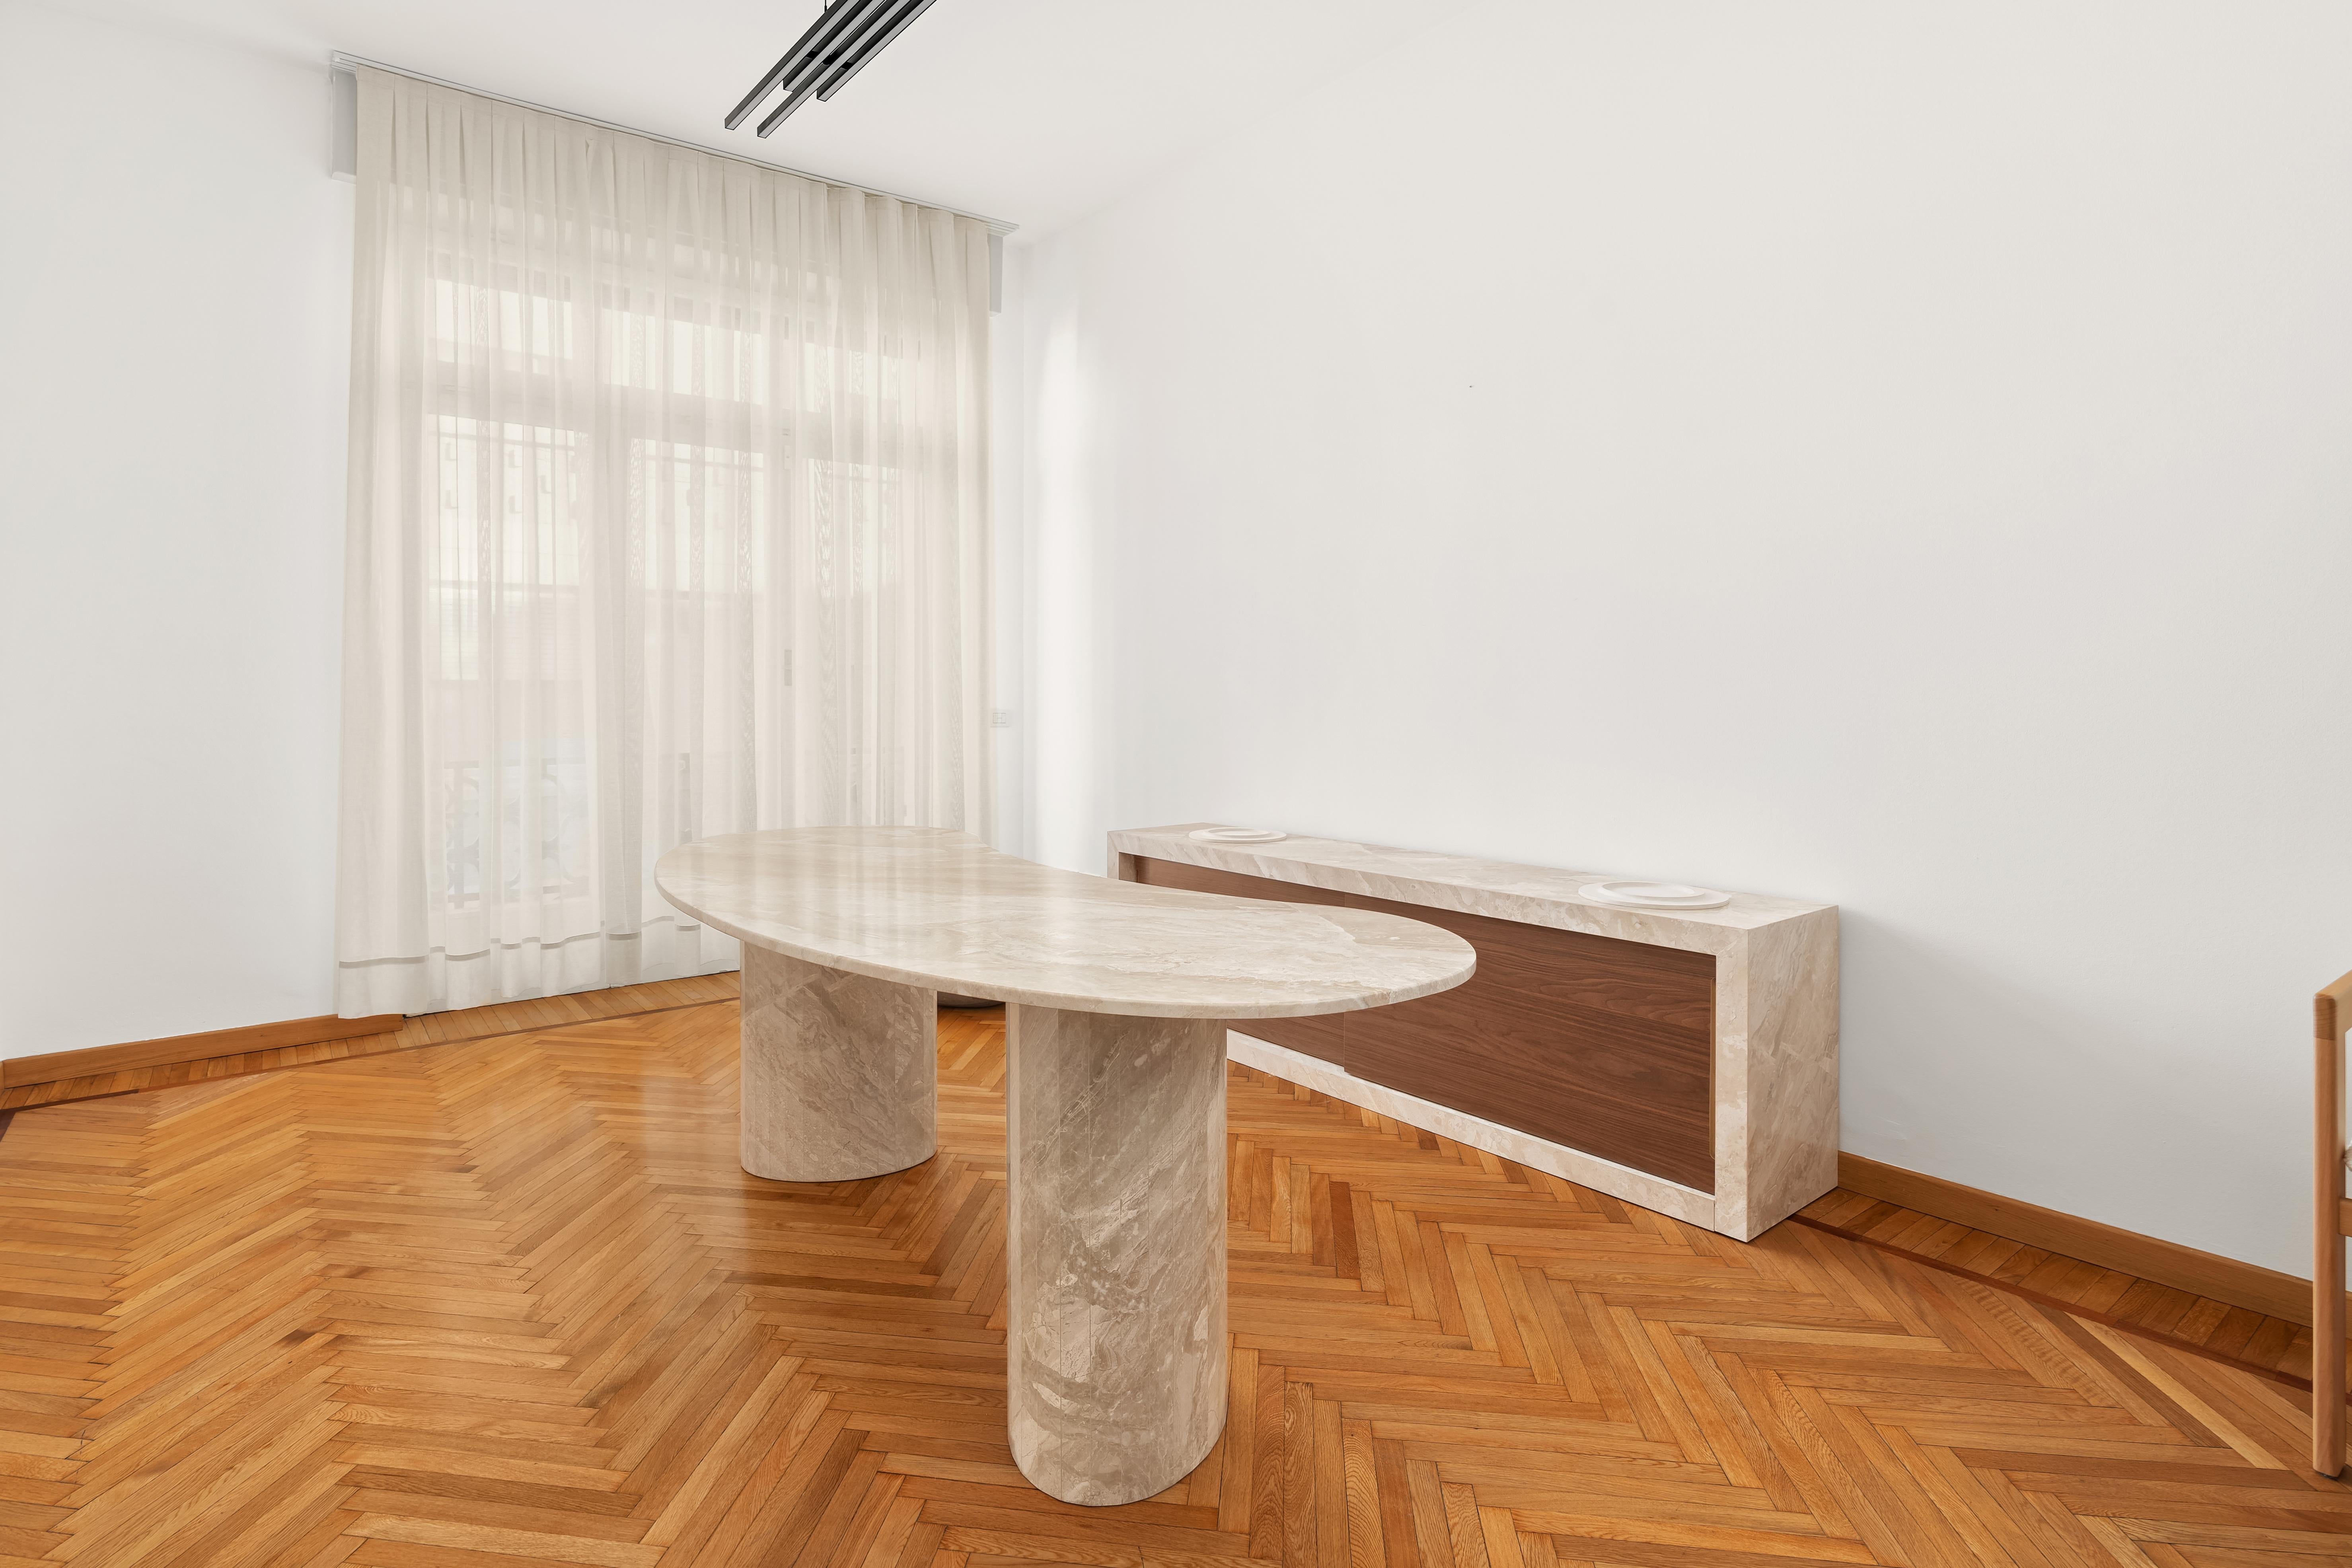 Sinuo Marble Dining Table by ​STUDIO IB MILANO
Signed
Dimensions: D 220 x H 75 cm.
Materials: Onice marble.

Also available in other stones.

Crafted with precision and a keen eye for detail, this tailor-made desk /table eschews sharp edges,